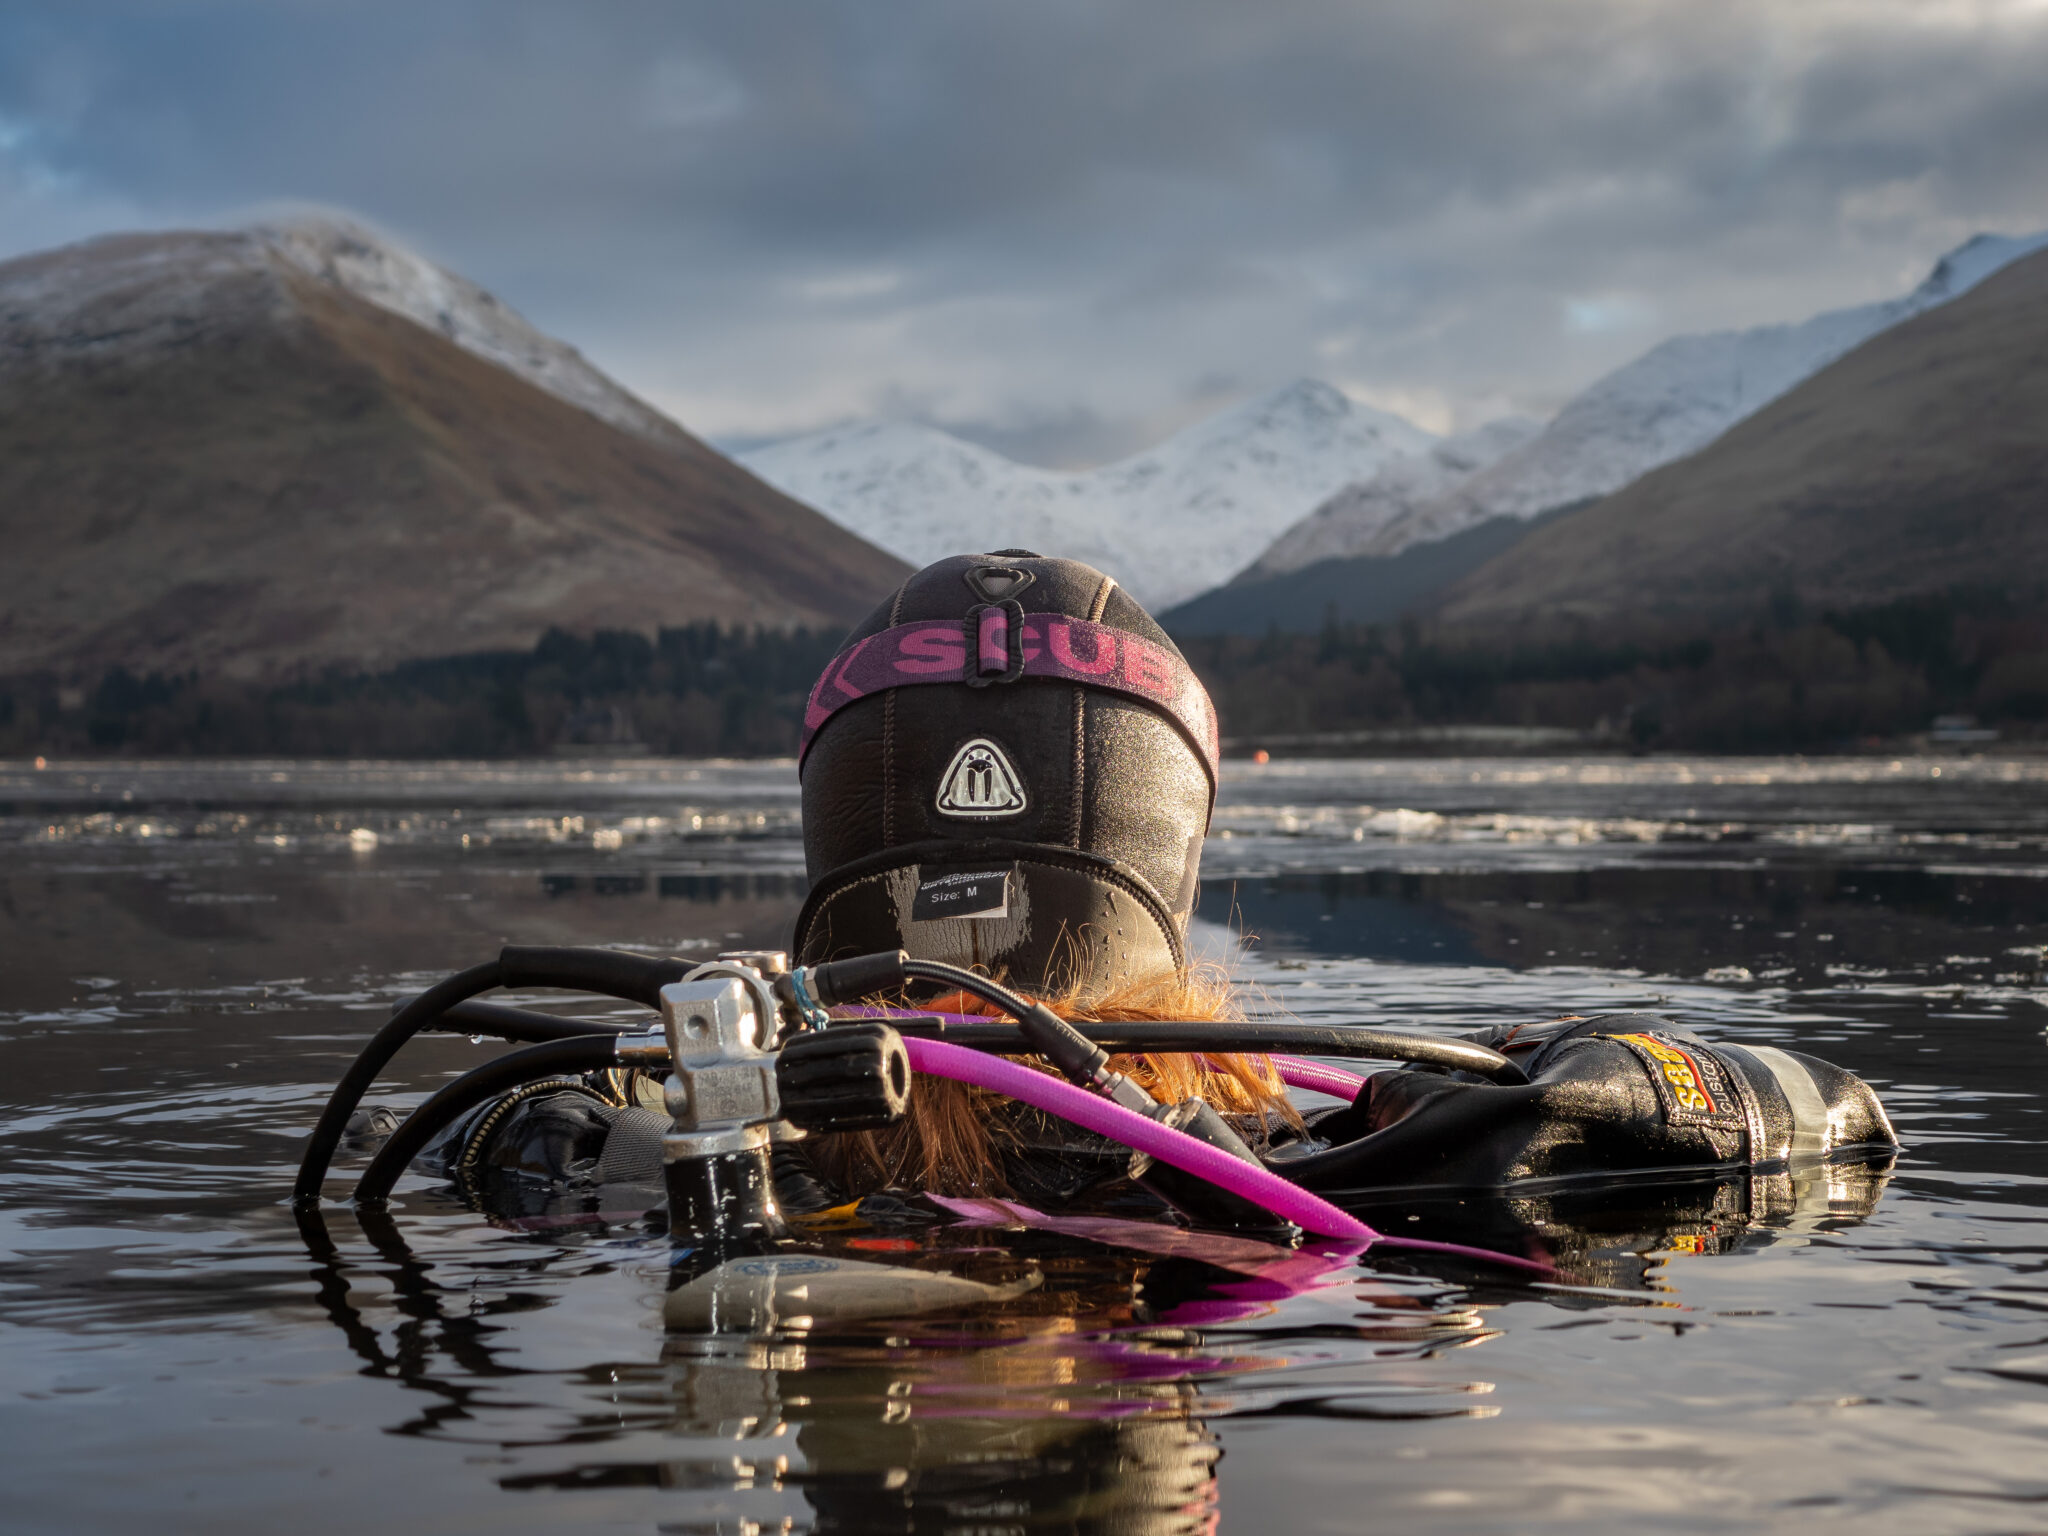 Diver on the surface of a loch surrounded by broken ice looking out over mountains peaked with snow.